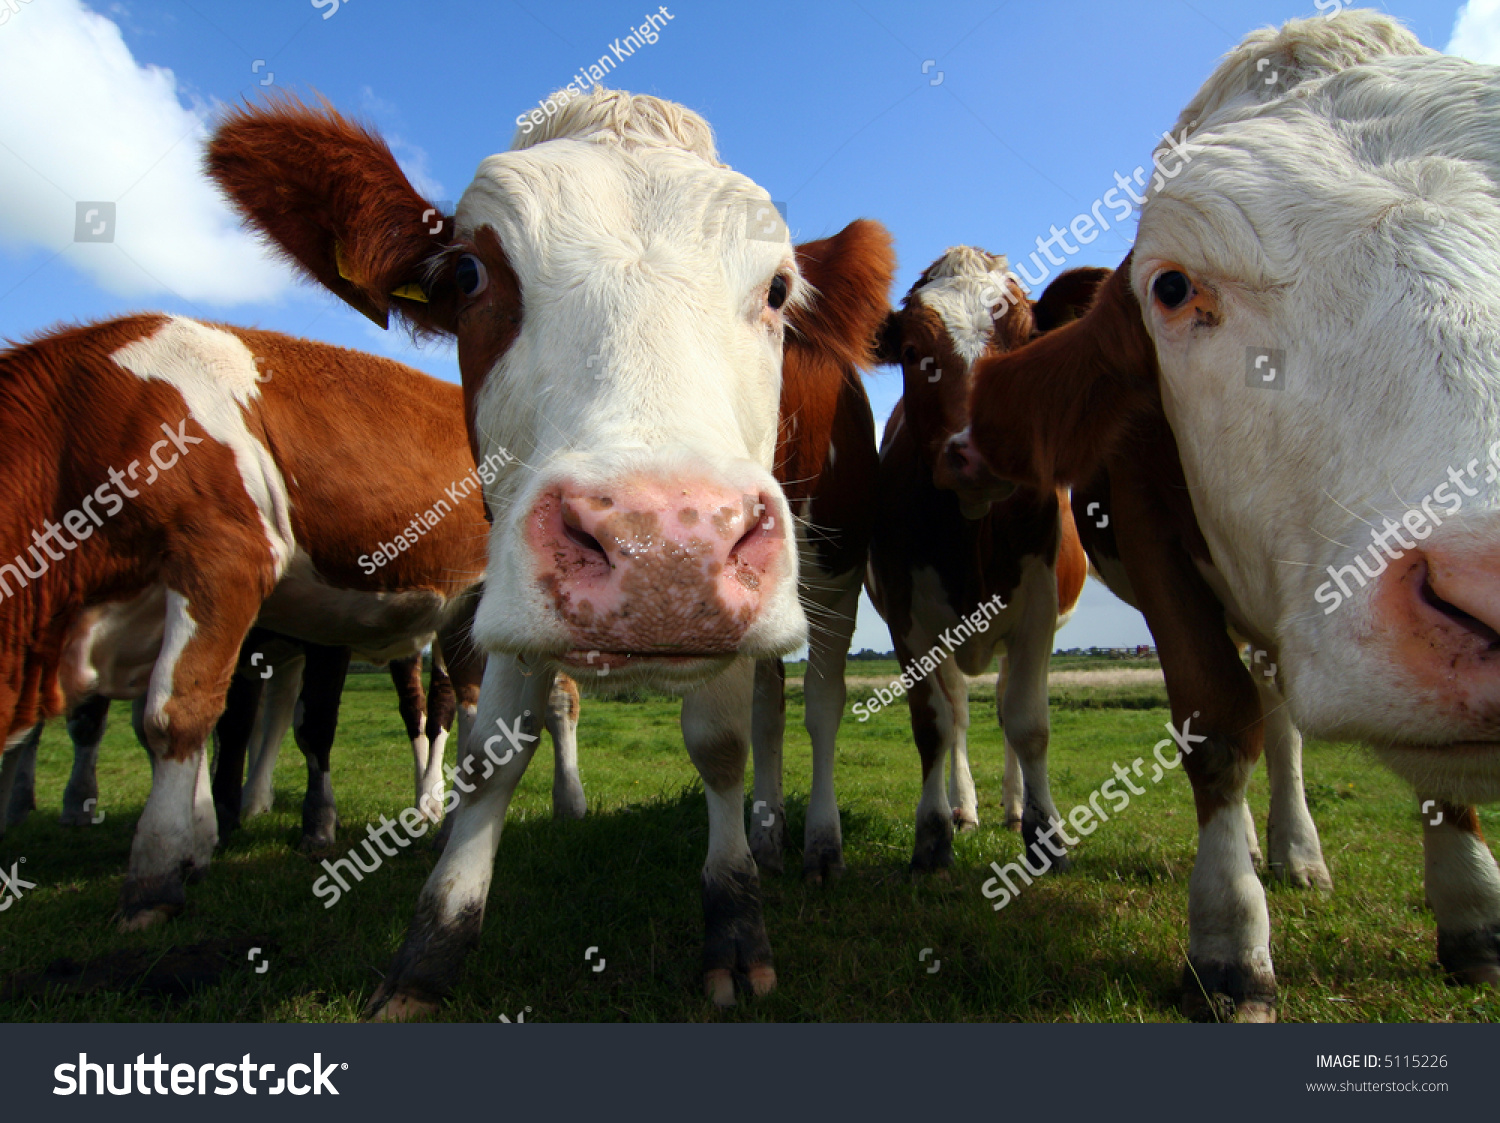 wide-angle shot of cows #5115226